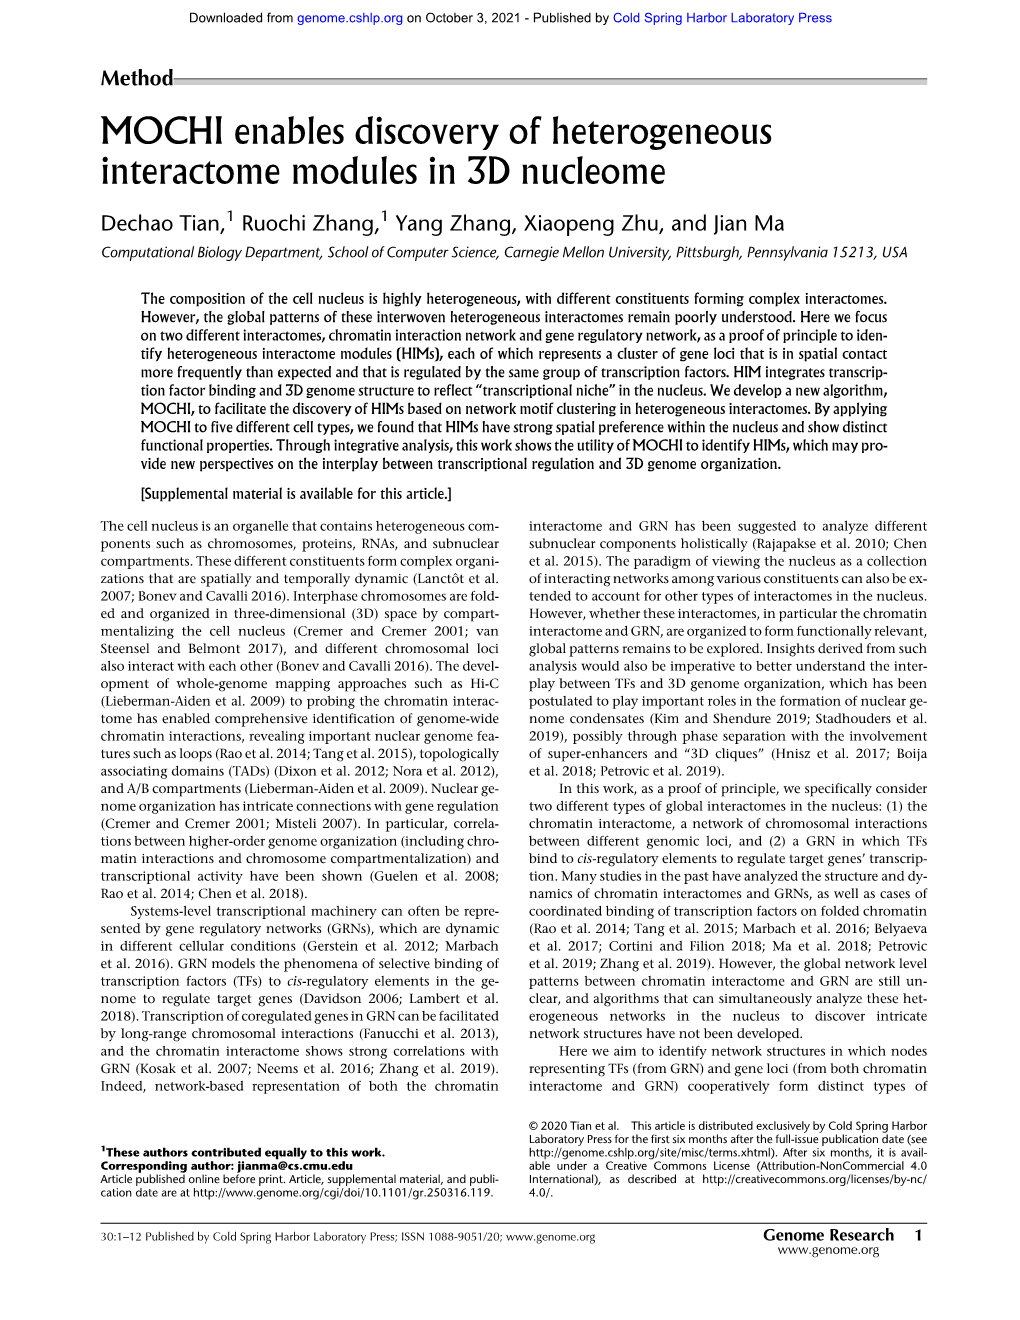 MOCHI Enables Discovery of Heterogeneous Interactome Modules in 3D Nucleome